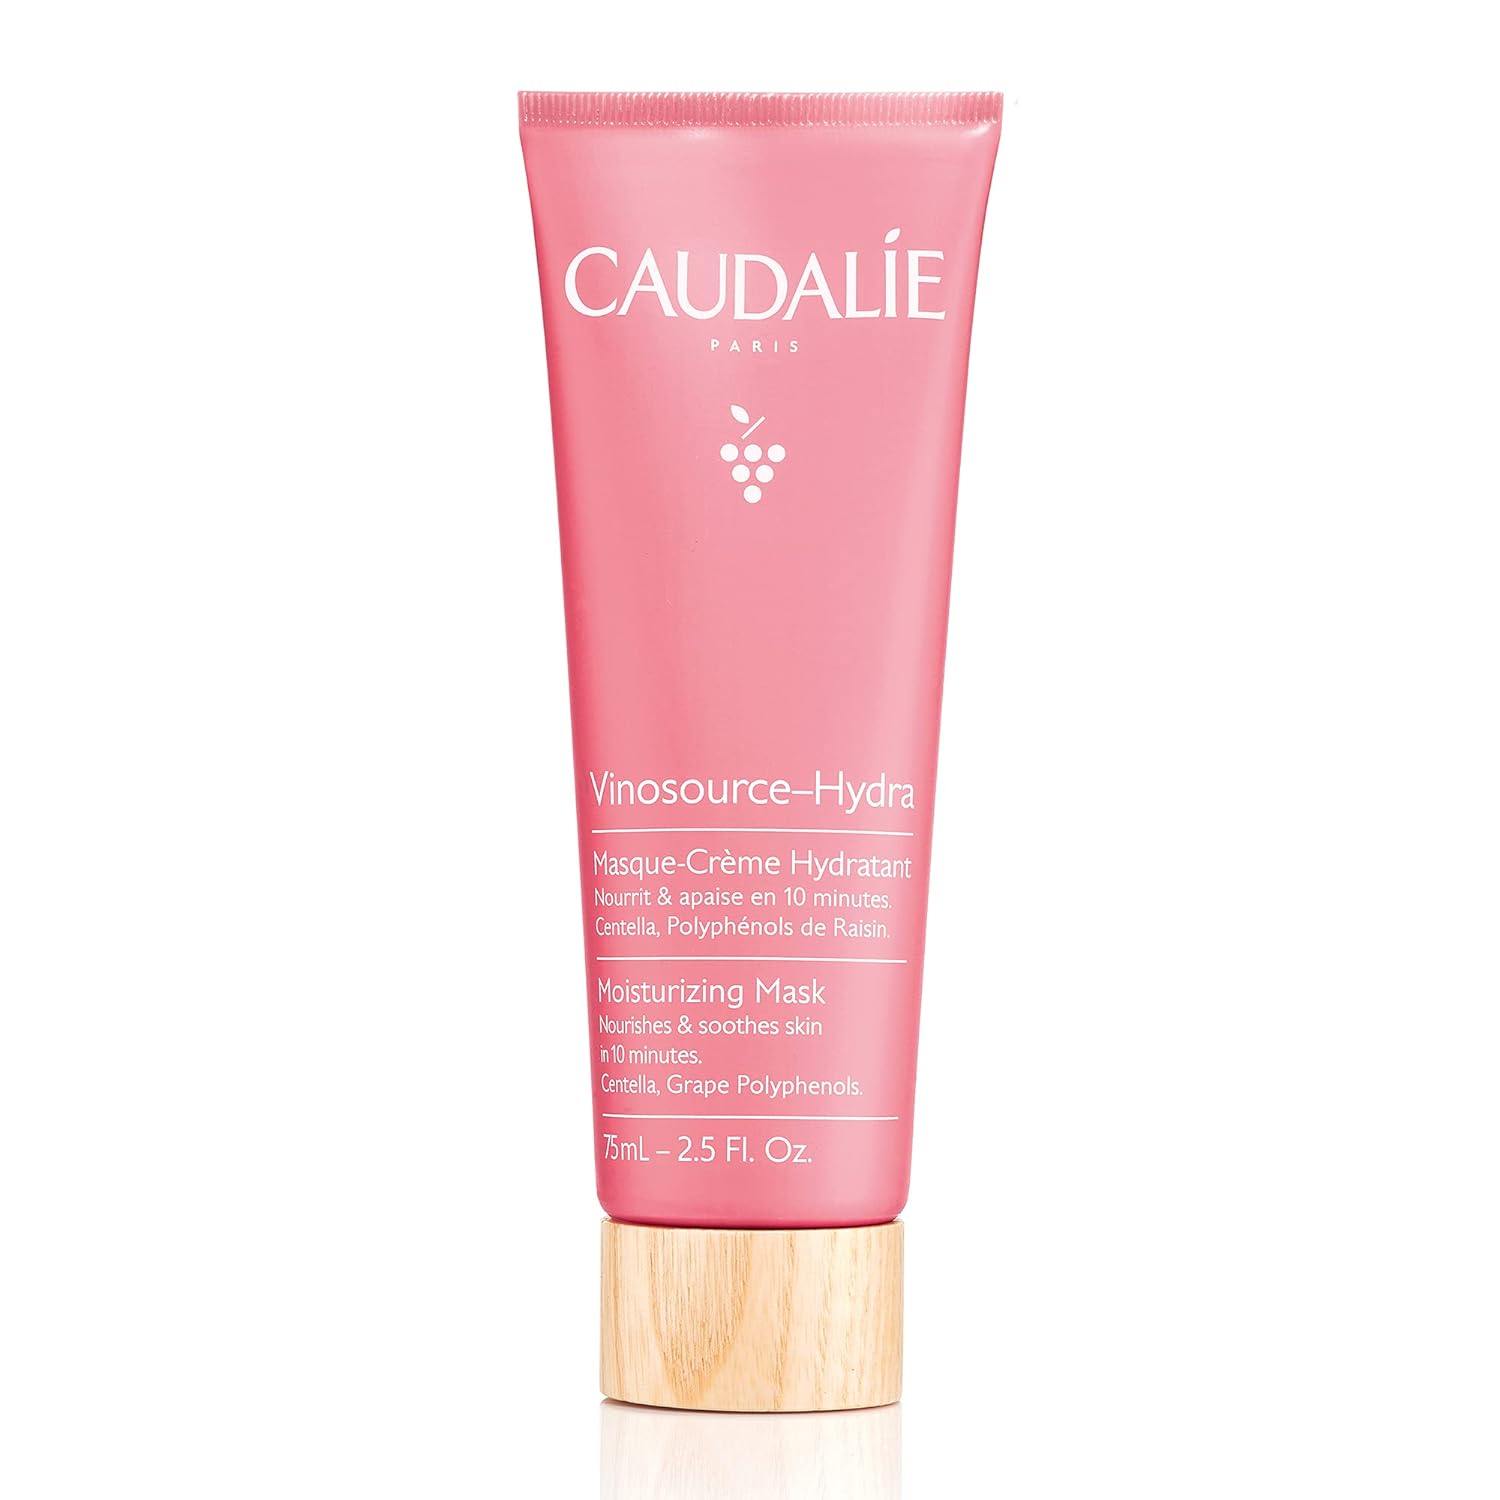 Caudalie Vinosource Moisturizing Mask, 10 min Hydration Booster with Centella Asiatica - Rescue Dry, Irritated, Dehydrated or Red Skin, 2.5 Fl. Oz